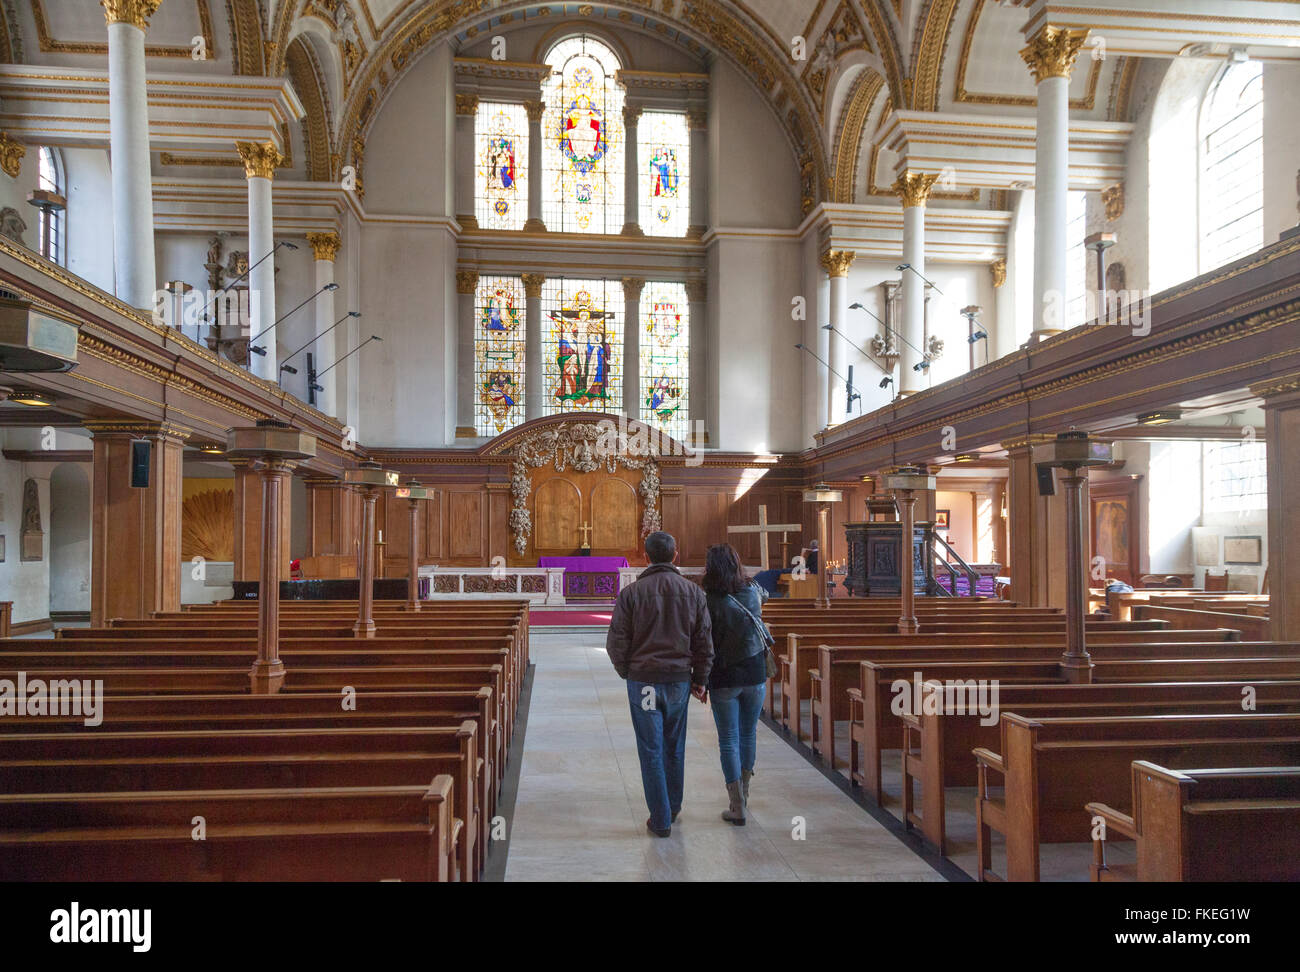 A couple looking at the interior of St James Church, Piccadilly London UK Stock Photo